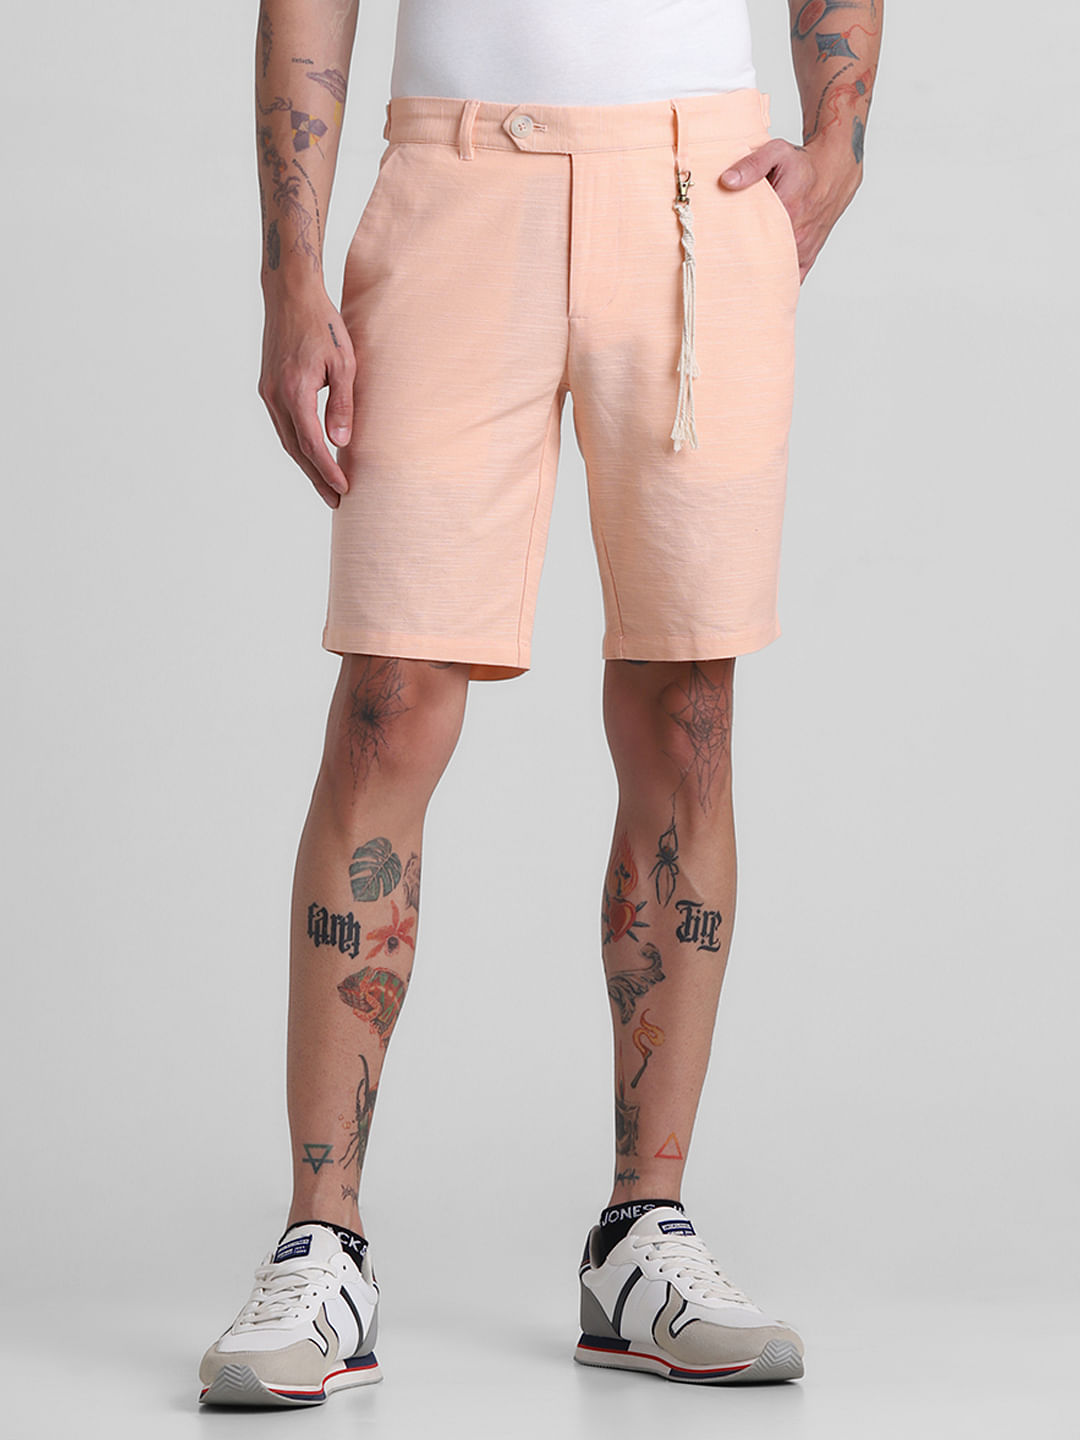 Cargo Shorts - Buy Cargo Shorts Online Starting at Just ₹147 | Meesho